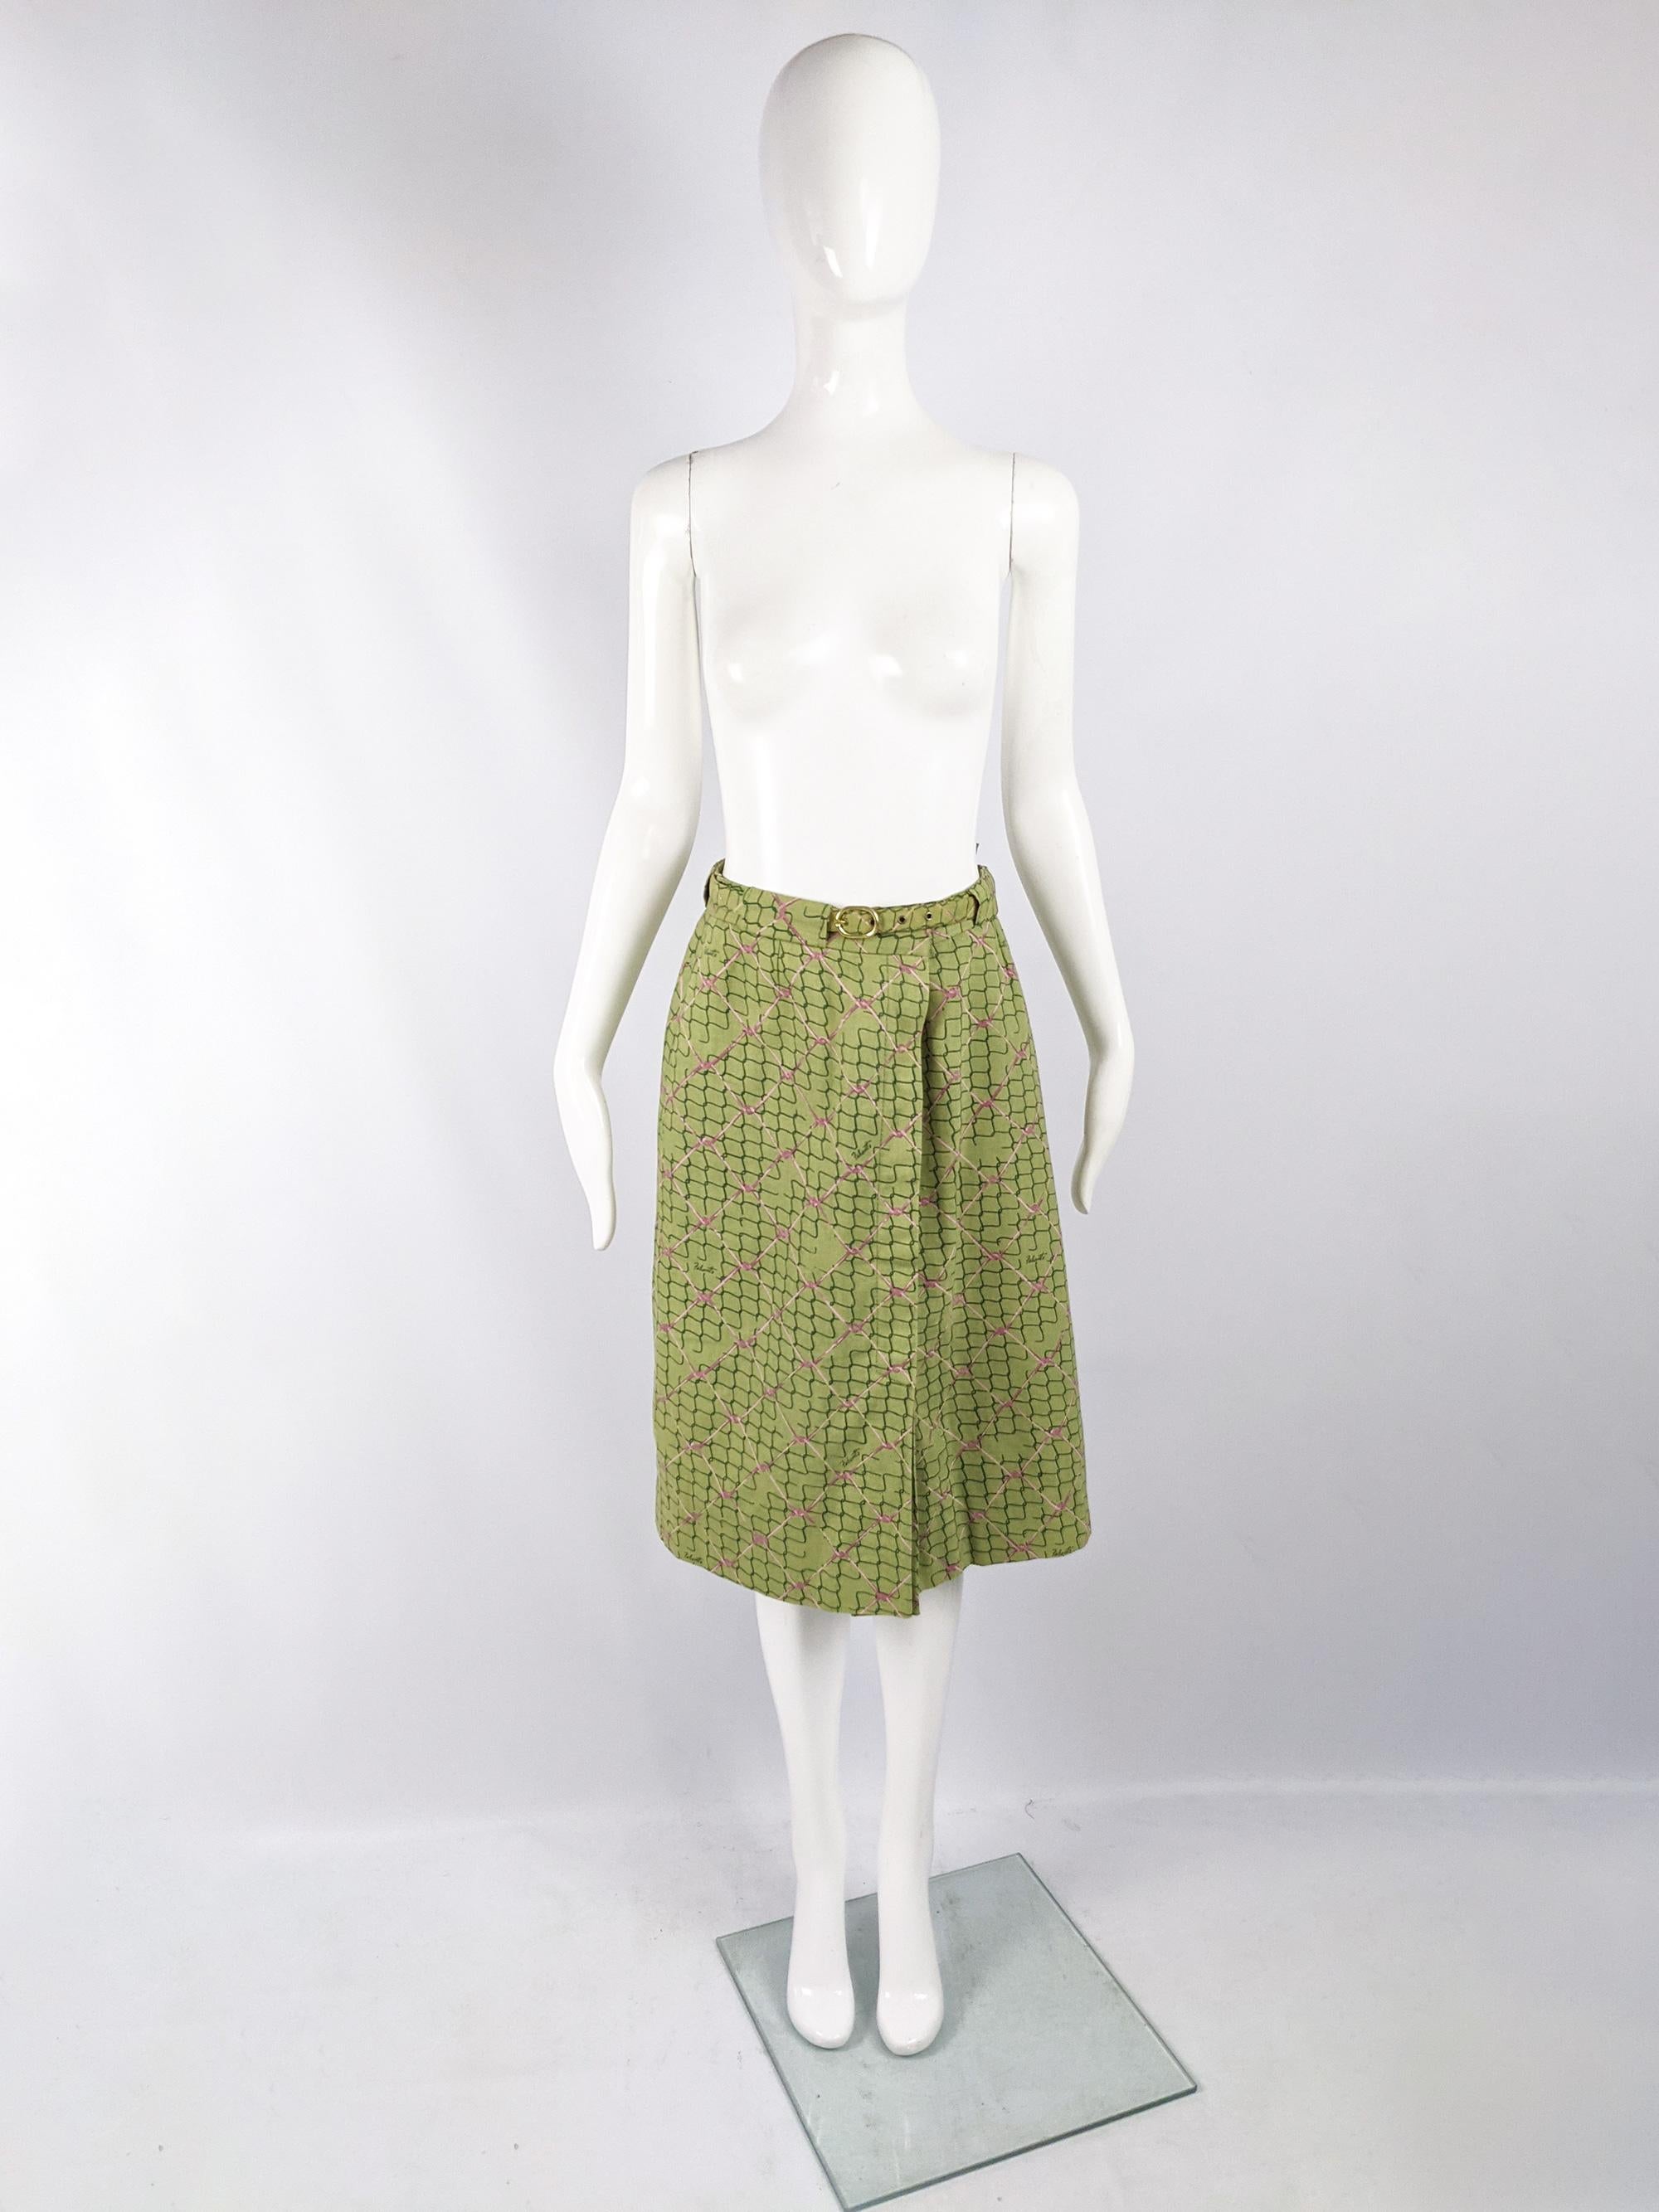 An amazing vintage womens skirt from the 70s by quality Italian label, Luisa Frassine using Ken Scott's Falconetto fabric. In a green cotton Falconetto fabric with an incredible, unique print of a pink and dark green wire fence with 'Falconetto'